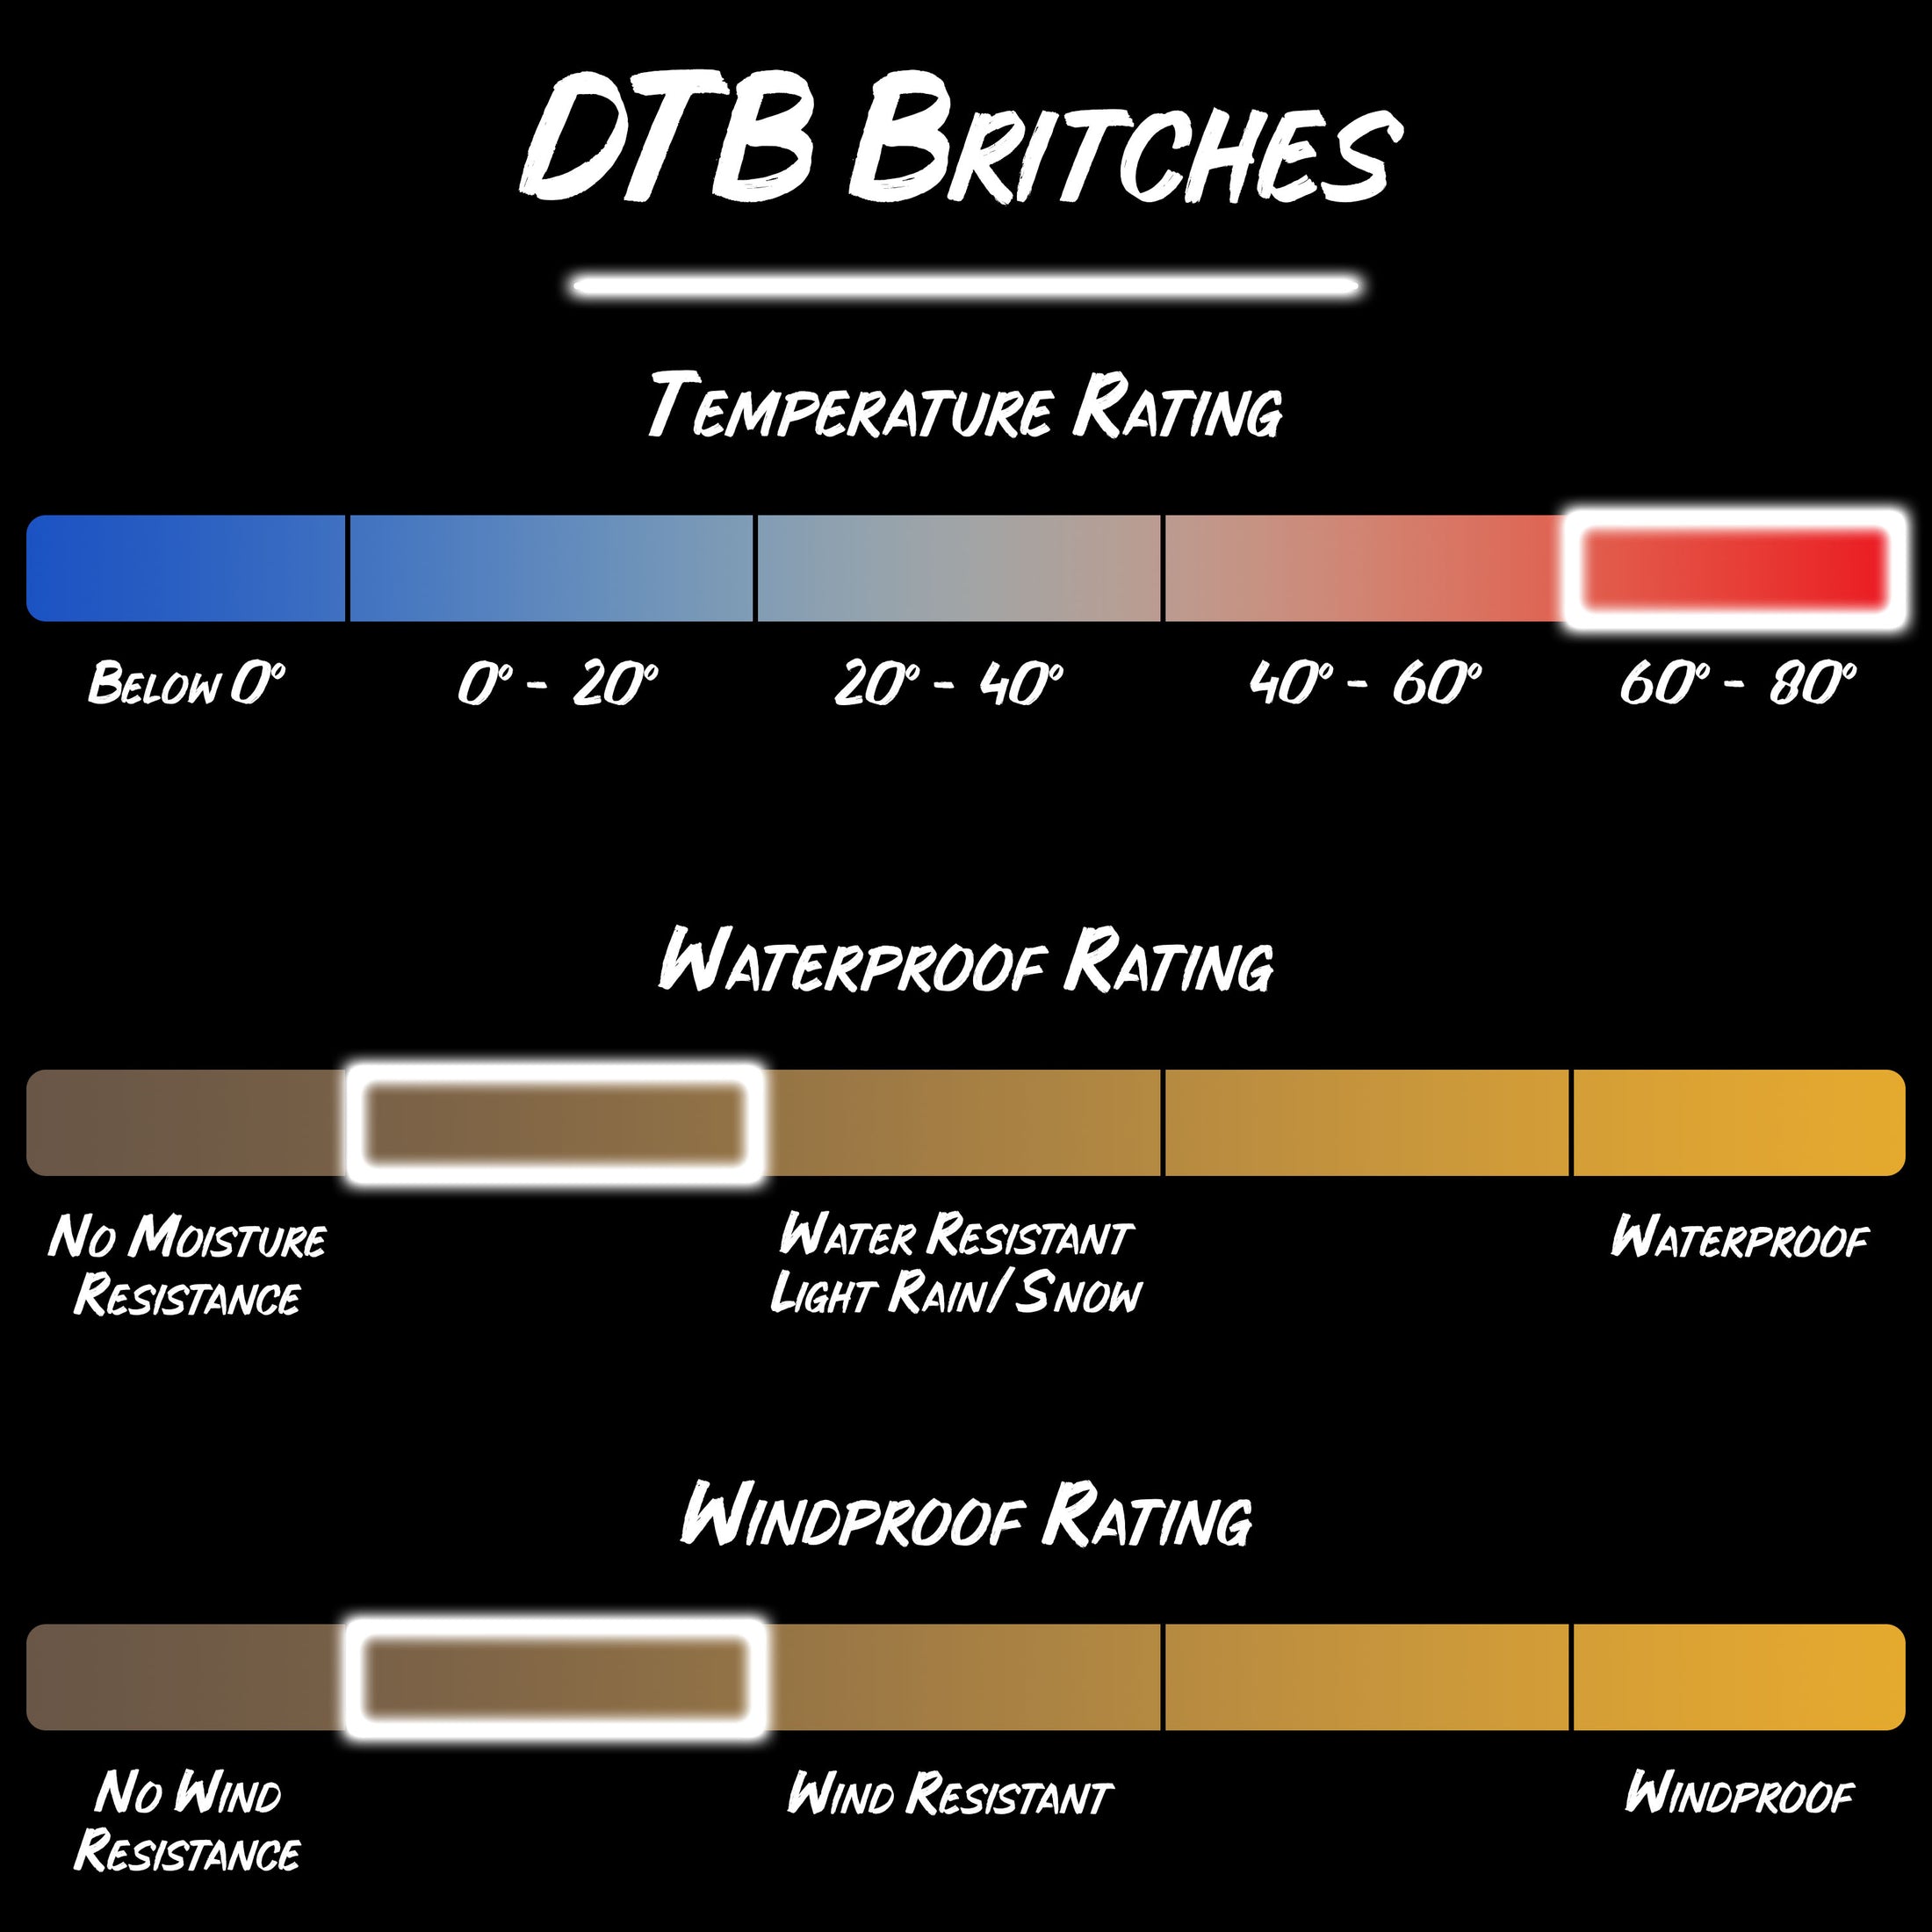 Gamekeeper DTB Britches product specifications.